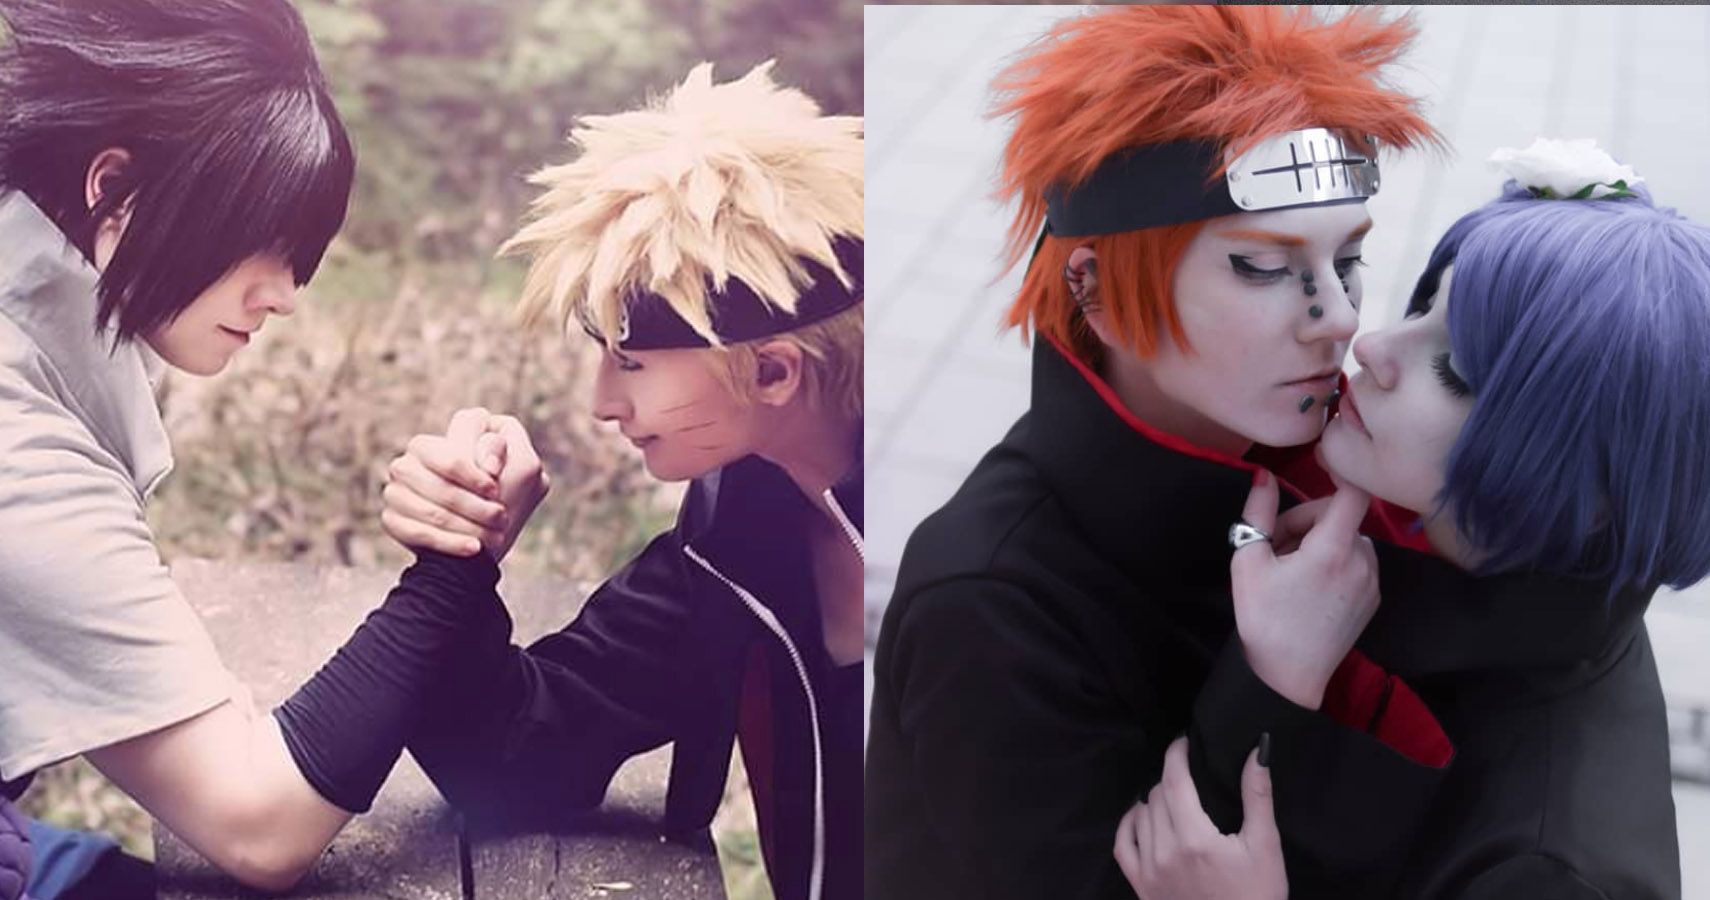 Impressive Naruto Cosplays That Look Just Like The Anime